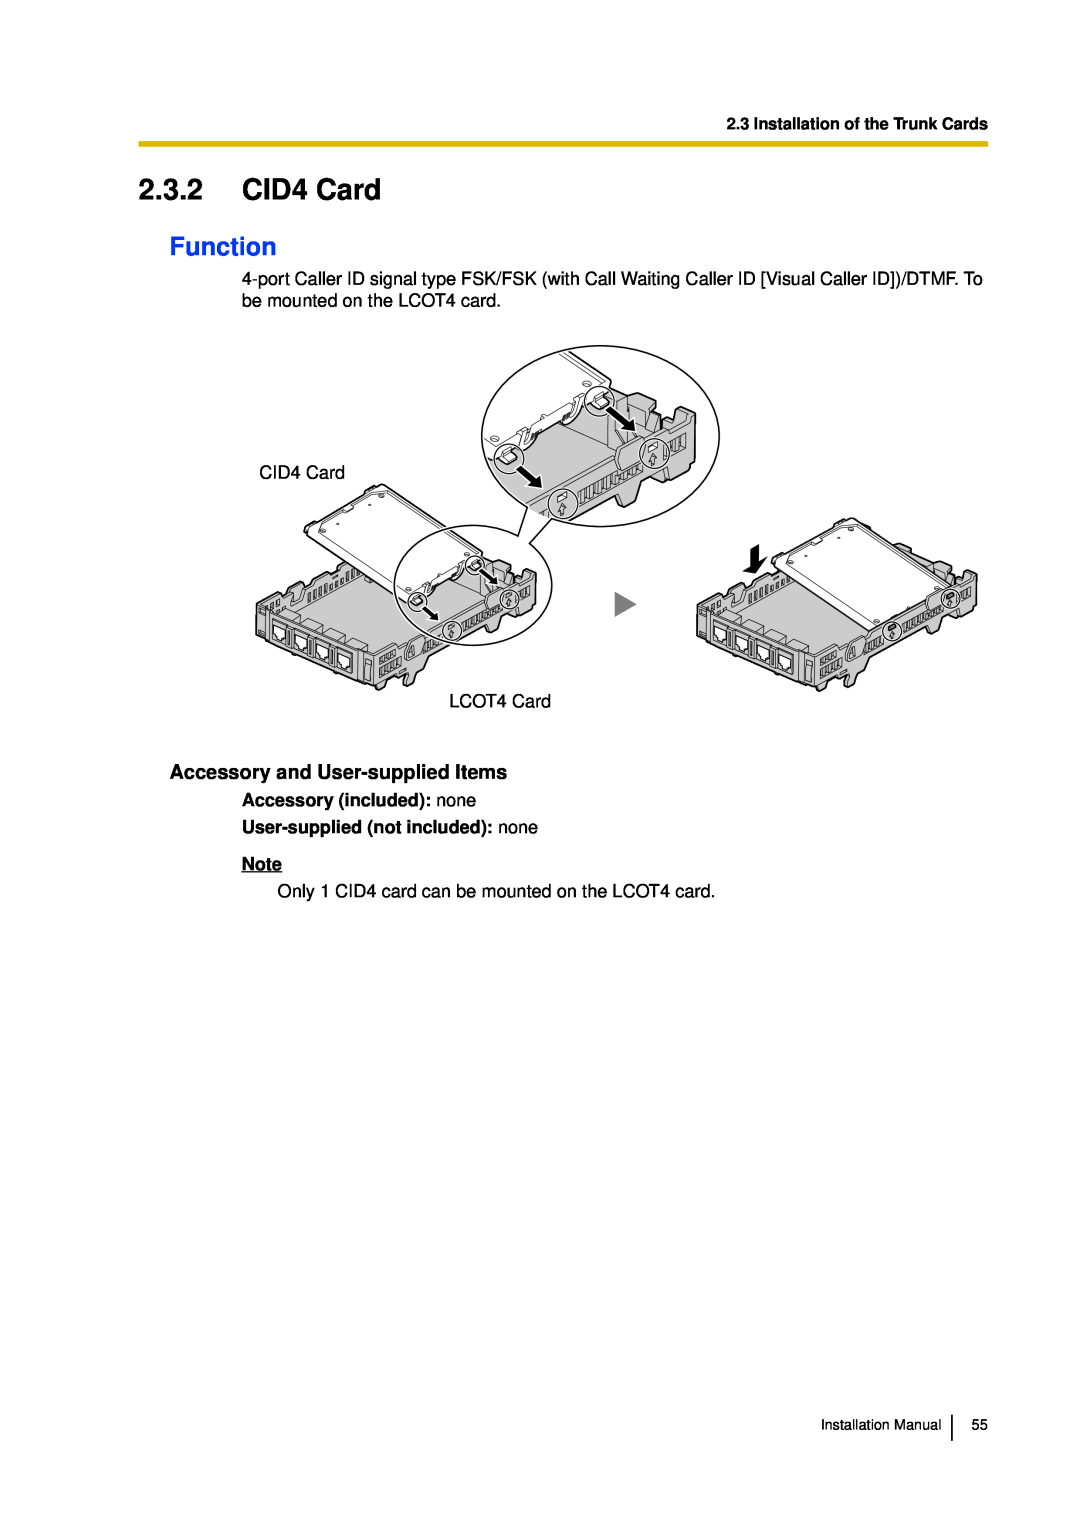 Panasonic KX-TDA30 installation manual 2.3.2CID4 Card, Function, Accessory included: none, User-suppliednot included: none 